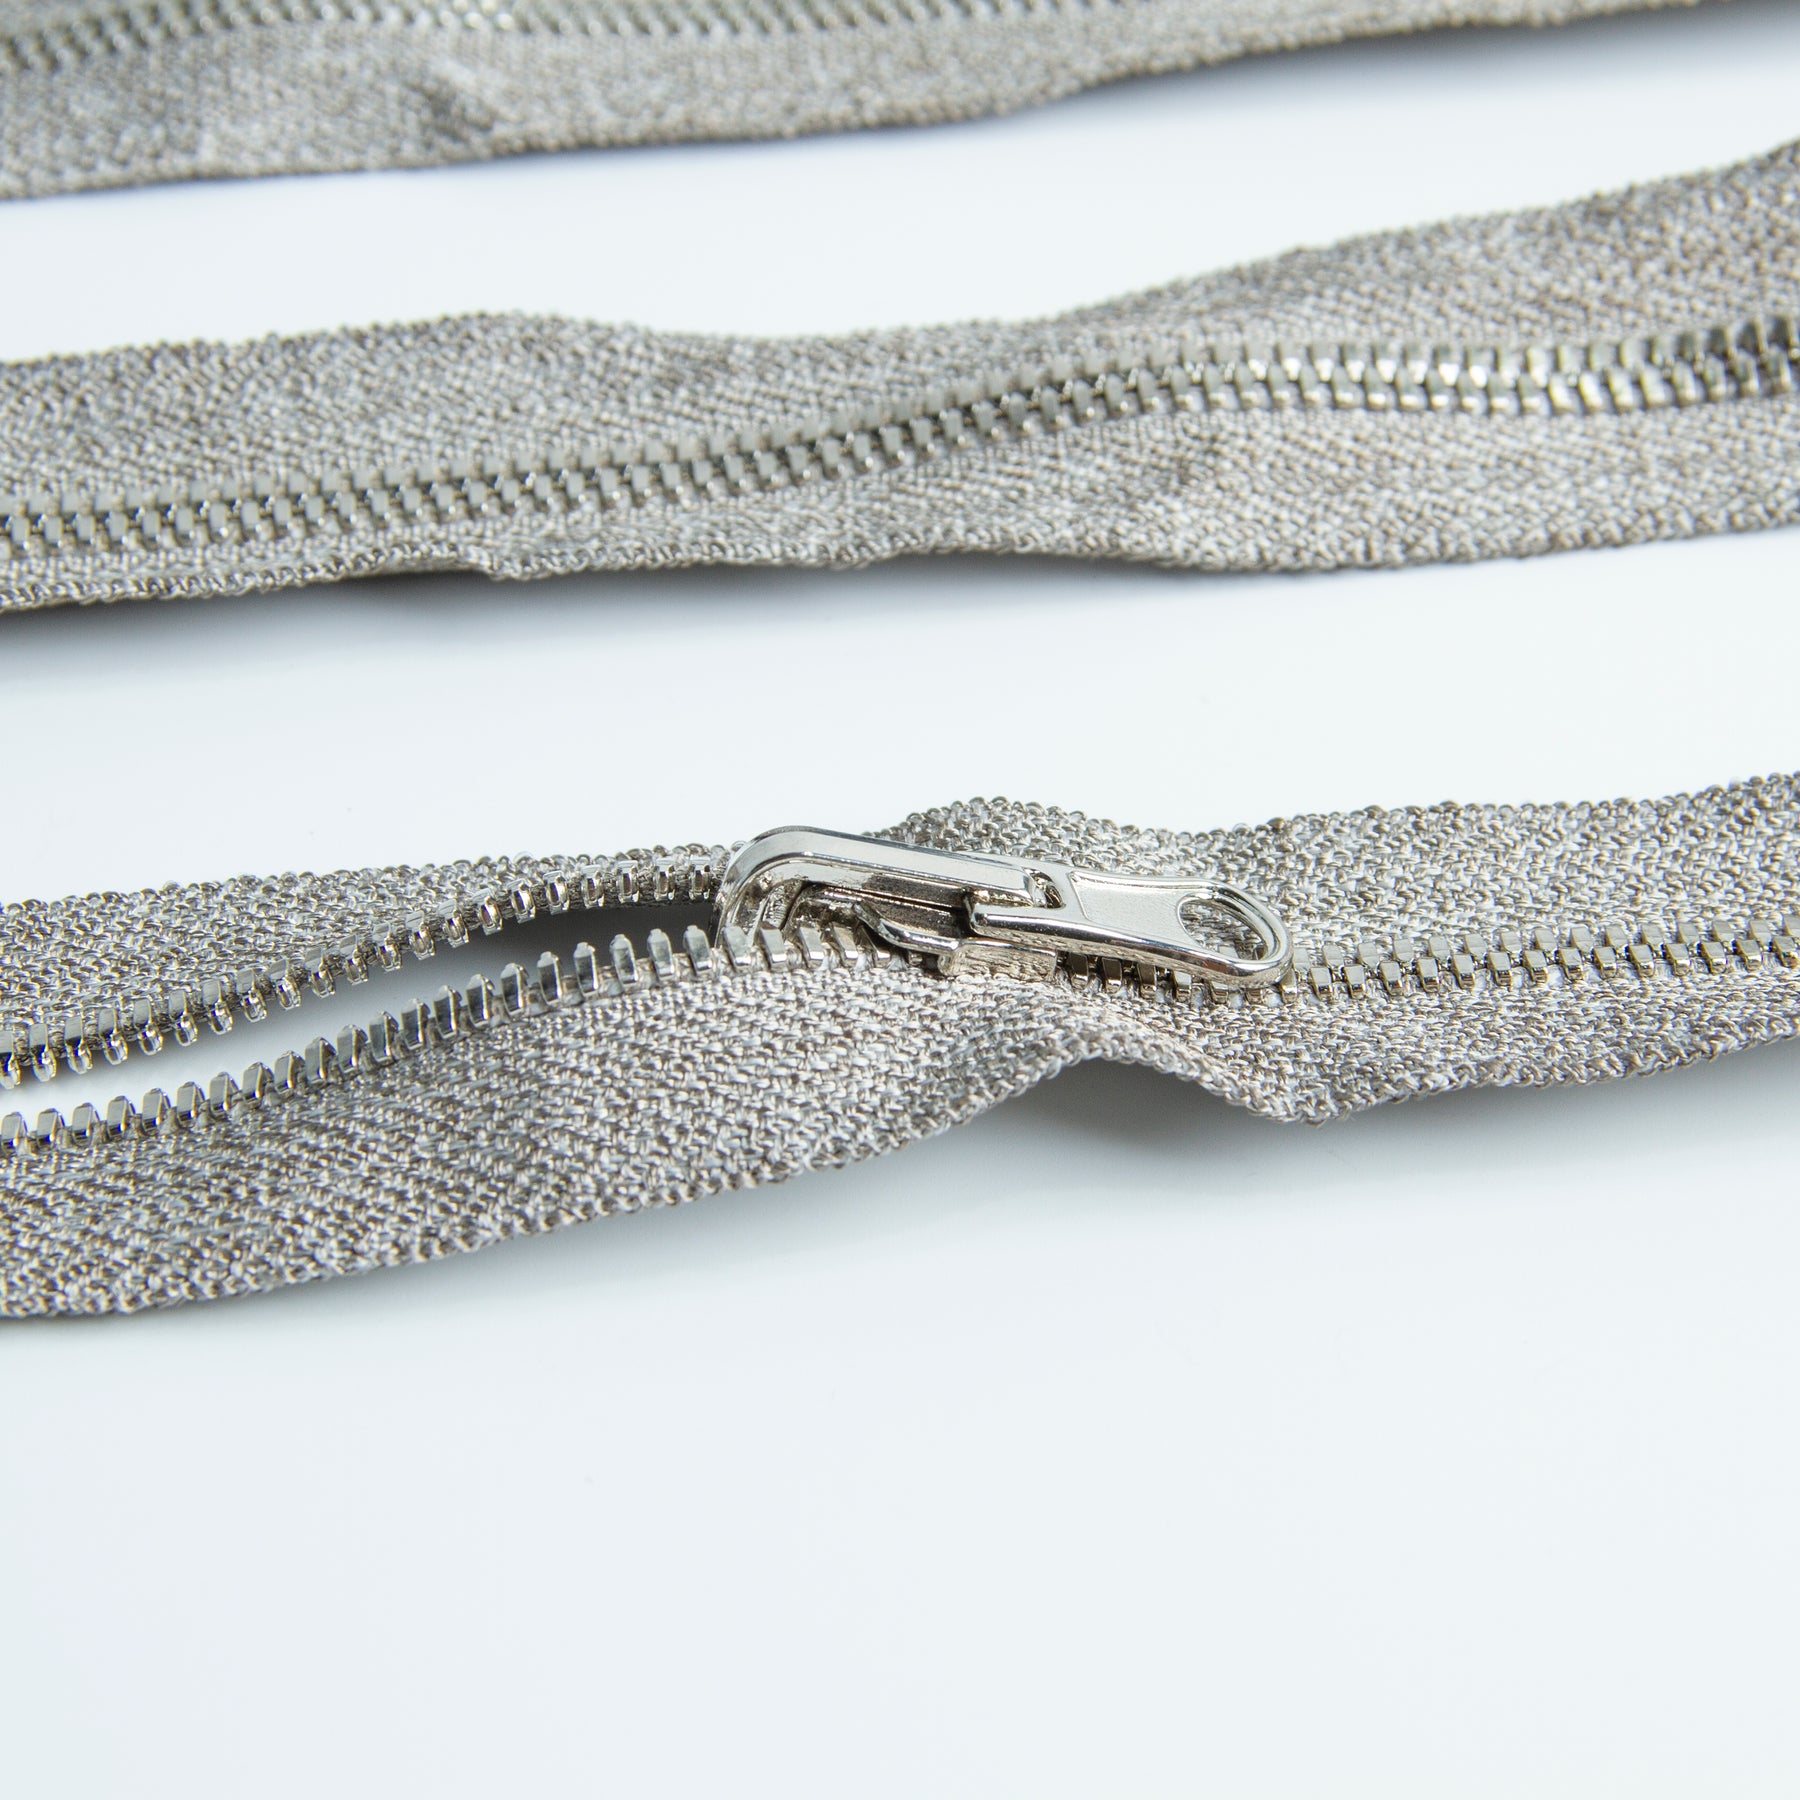 Three Silver Plated Conductive Zippers are parallel with each other